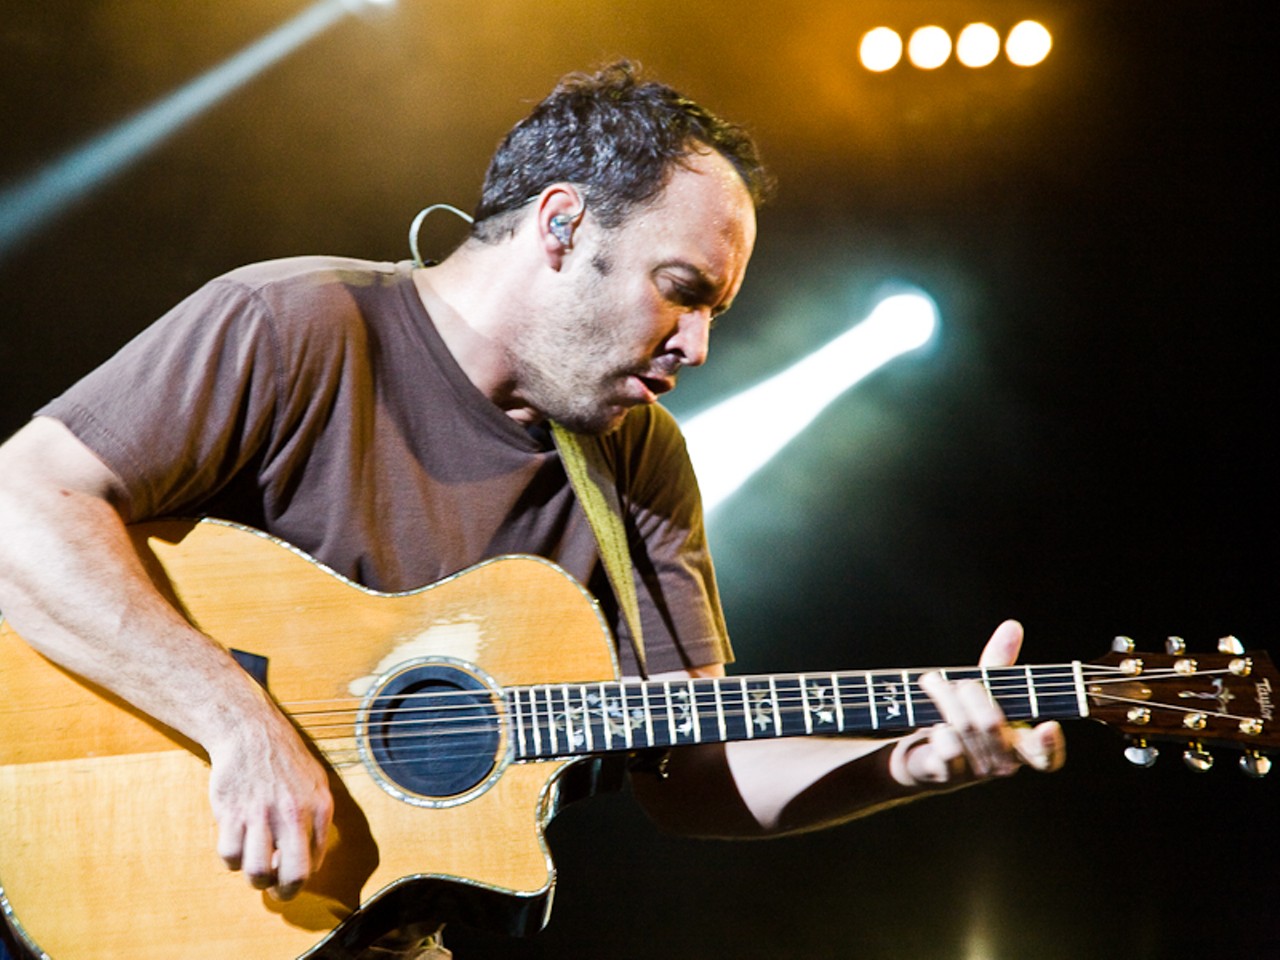 Dave Matthews might not have been strumming in Busch Stadium like he did last year at this time, but he still kept fans happy at this June 17 show at Verizon Wireless Amphitheater. More photos.